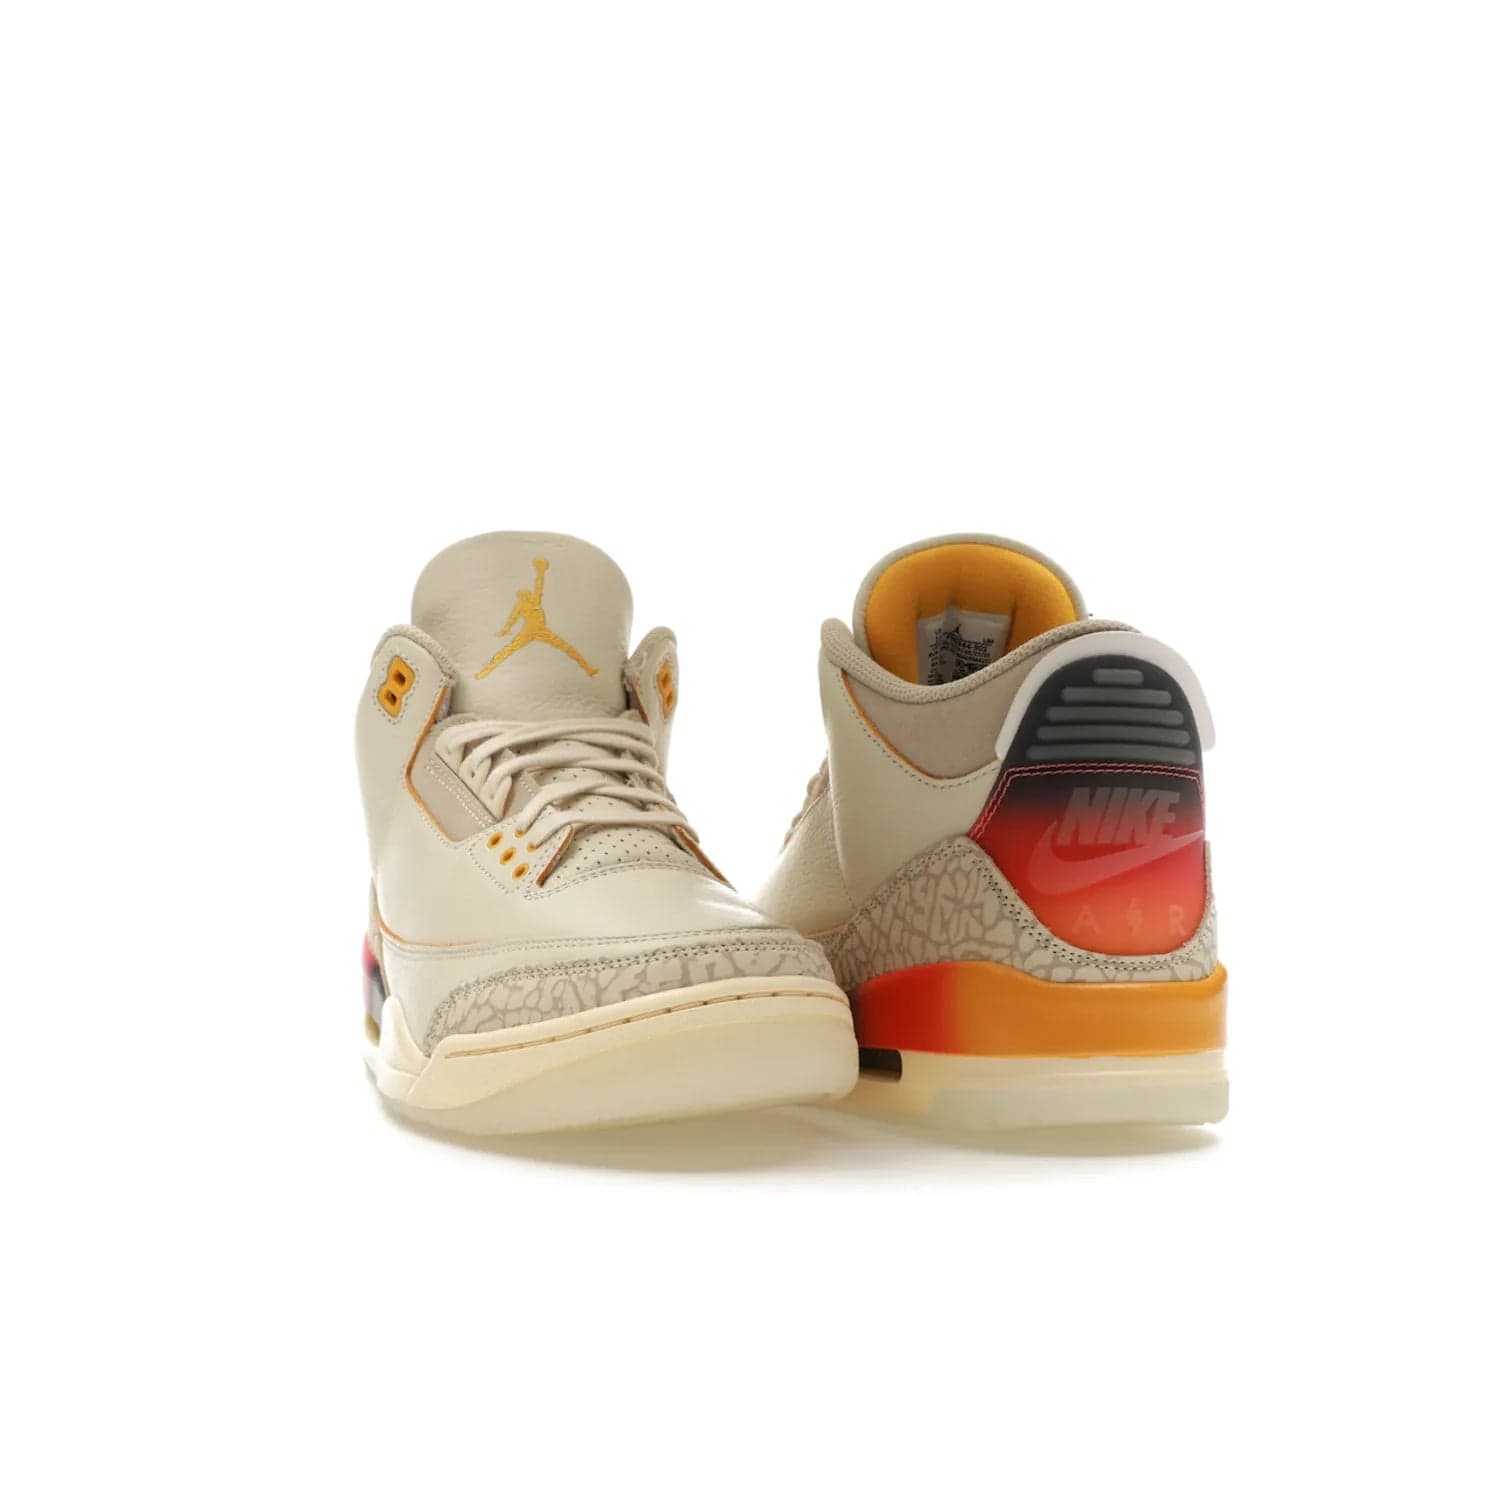 Jordan 3 Retro SP J Balvin Medellín Sunset - Image 8 - Only at www.BallersClubKickz.com - J Balvin x Jordan 3 Retro SP: Celebrate the joy of life with a colorful, homage to the electrifying reggaeton culture and iconic Jordan 3. Limited edition, Sept. 23. $250.